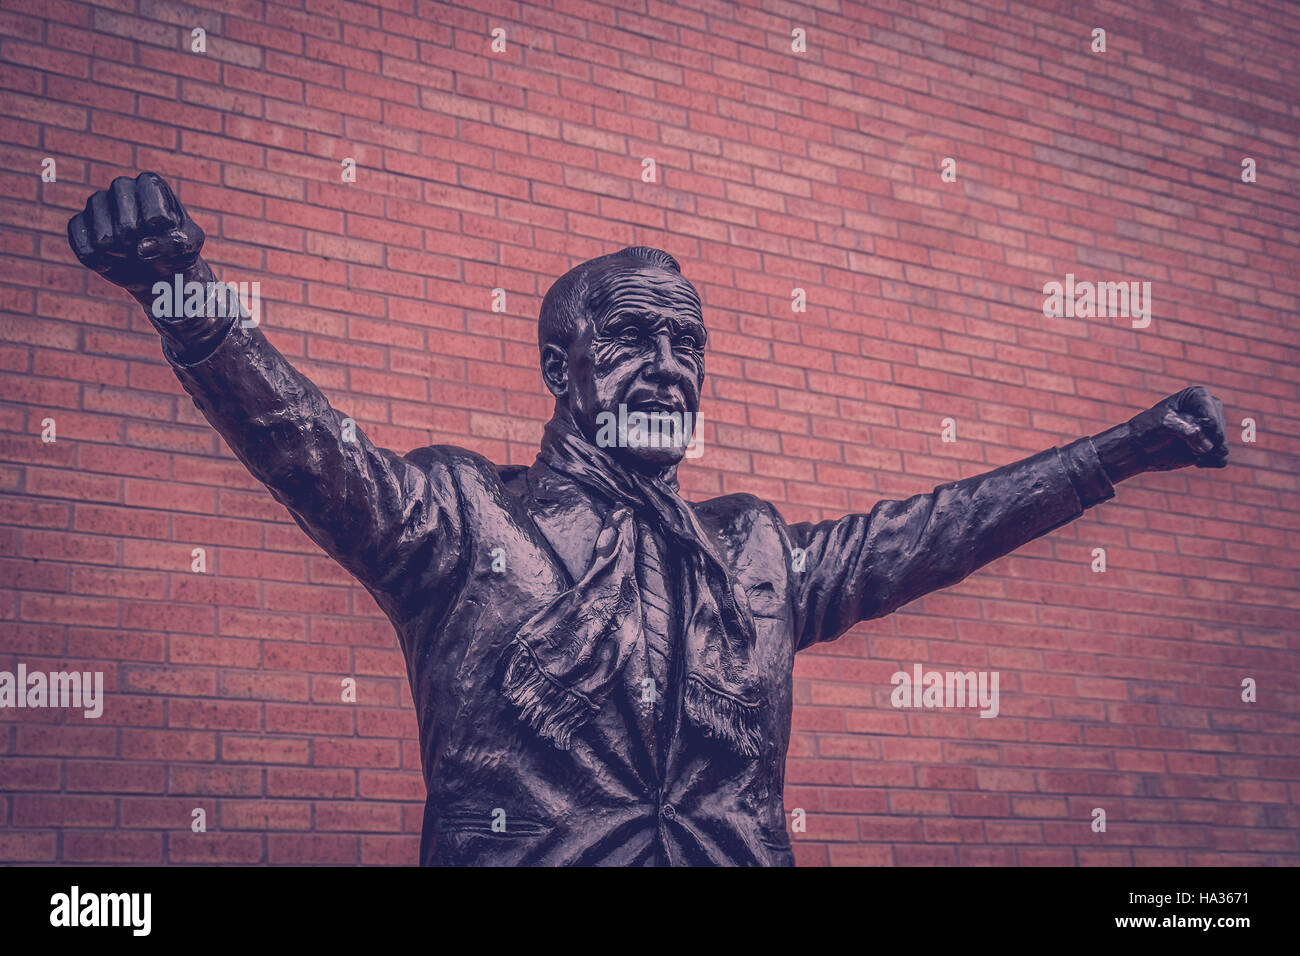 A statue of Bill Shankly outside Anfield, the home of Liverpool FC.  Shankly is arguably the most famous figure in Liverpool Football Club's illustrio Stock Photo